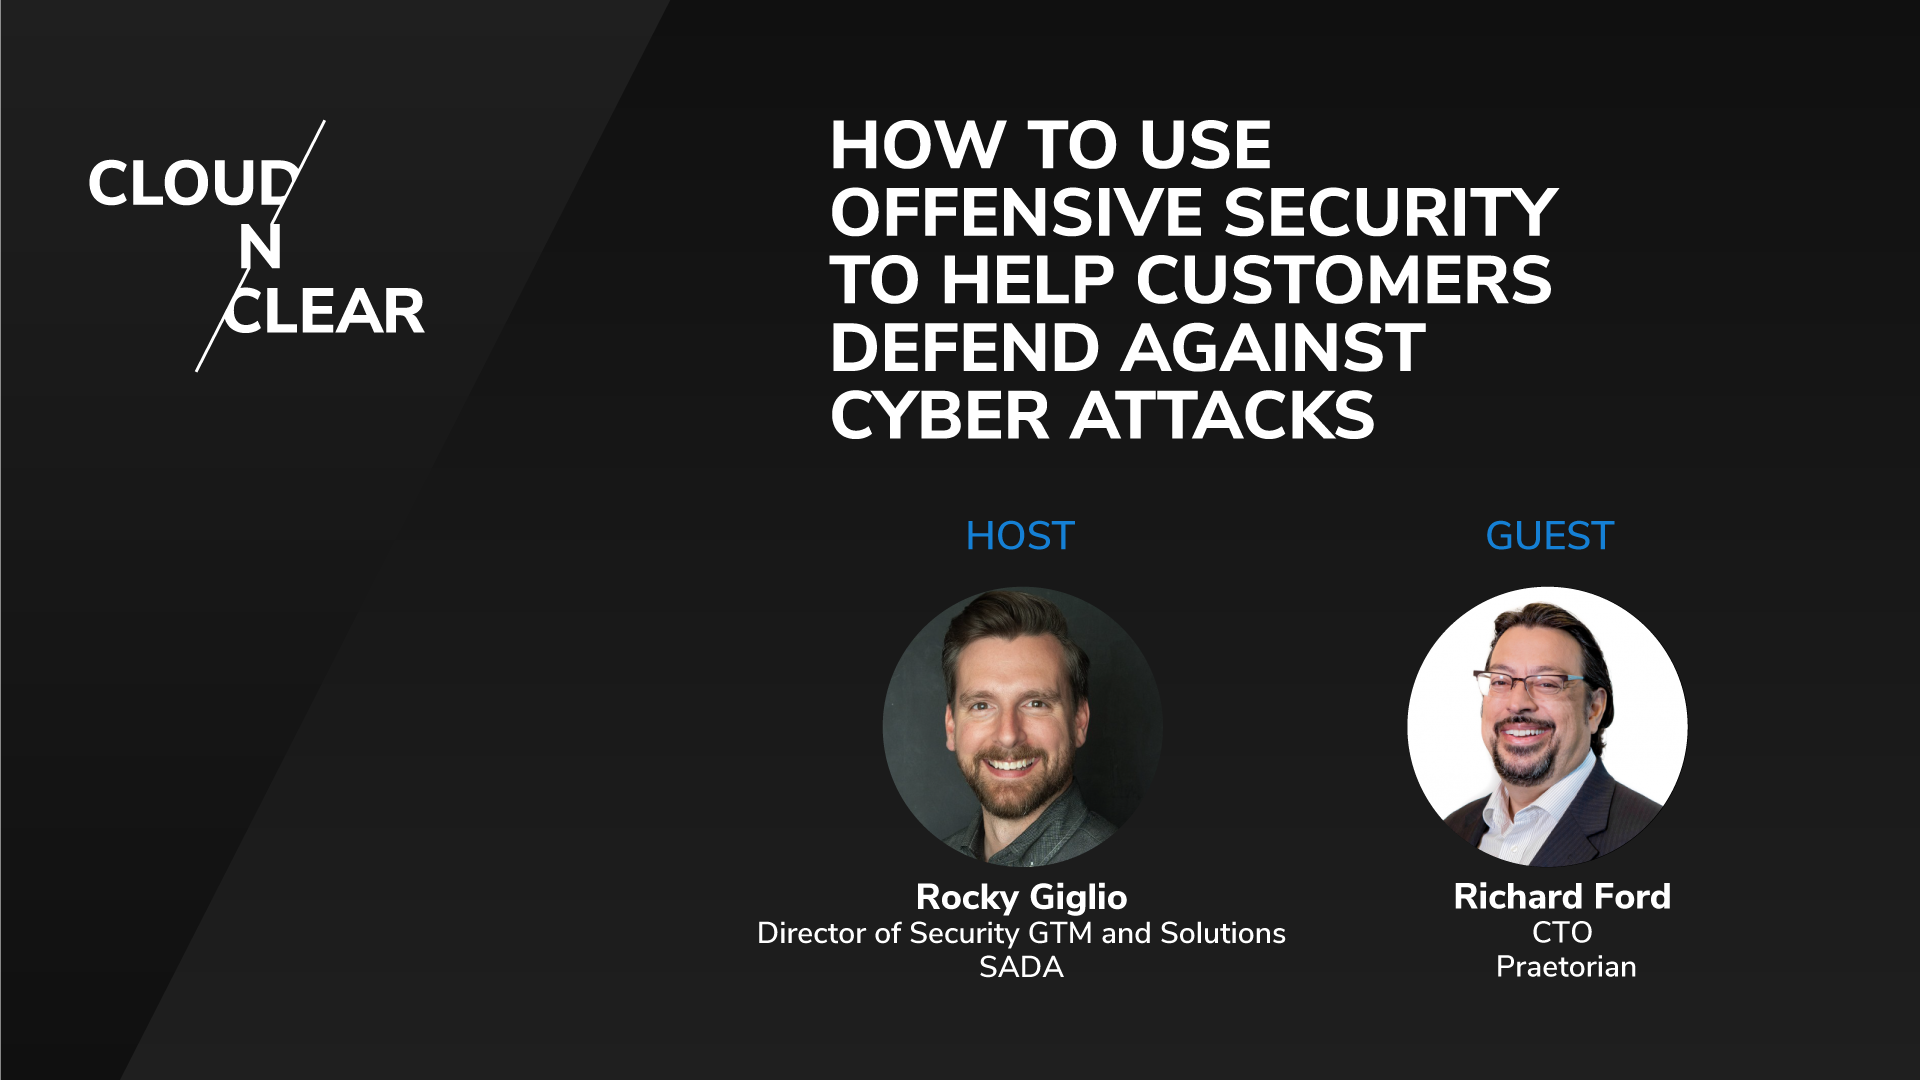 How To Use Offensive Security To Help Customers Defend Against Cyber Attacks